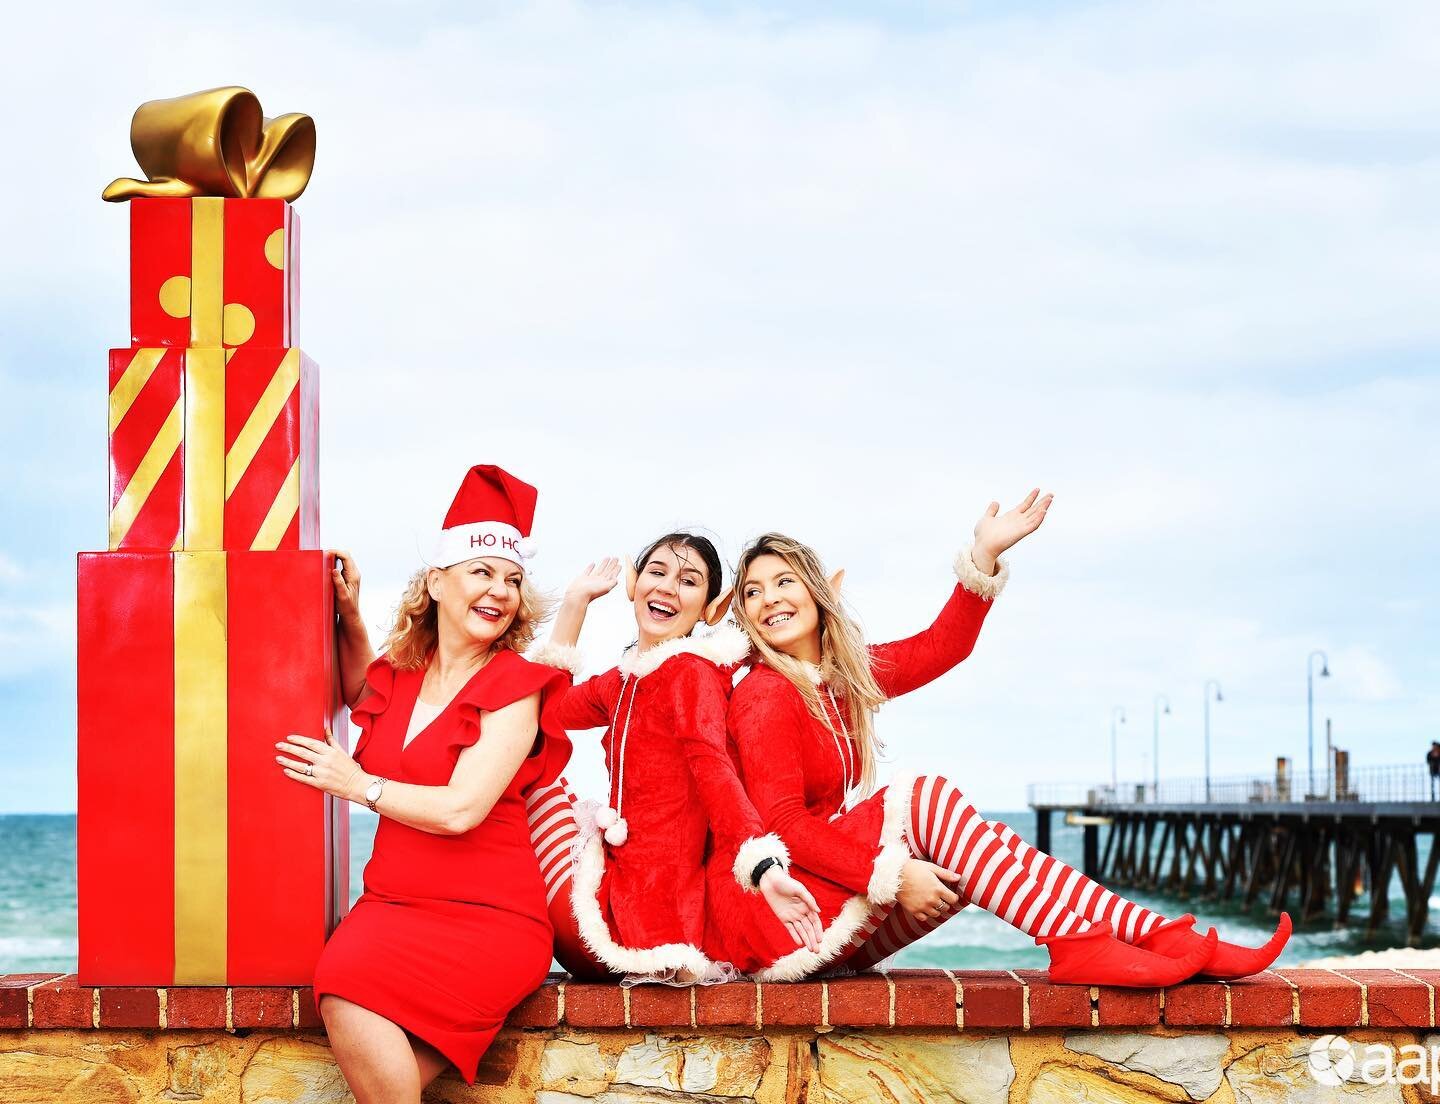 Riding the Christmas wave - join the more than 25,000 people expected to enjoy Glenelg&rsquo;s 65th Christmas pageant today #aap #glenelgchristmaspageant #cityofholdfastbay #kerynstevensphotography www.kerynstevens.com